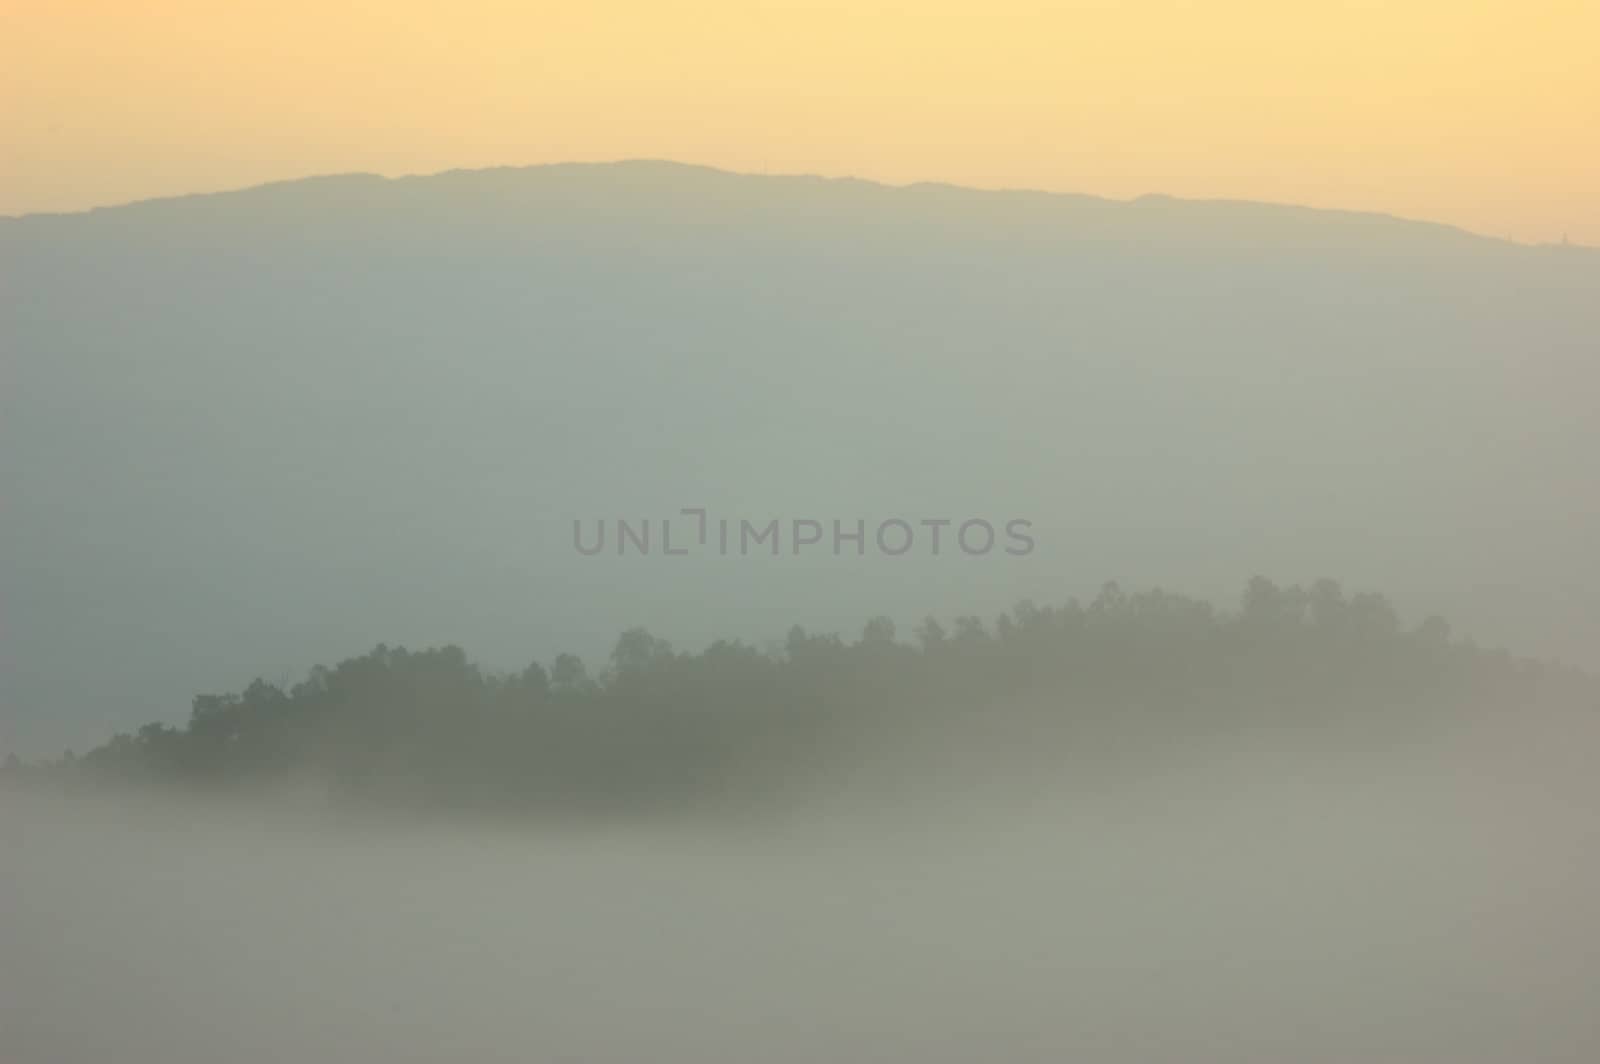 Sunrise in the morning mist cover pine tree forest form  Mae Chaem, Chiangmai Thailand.